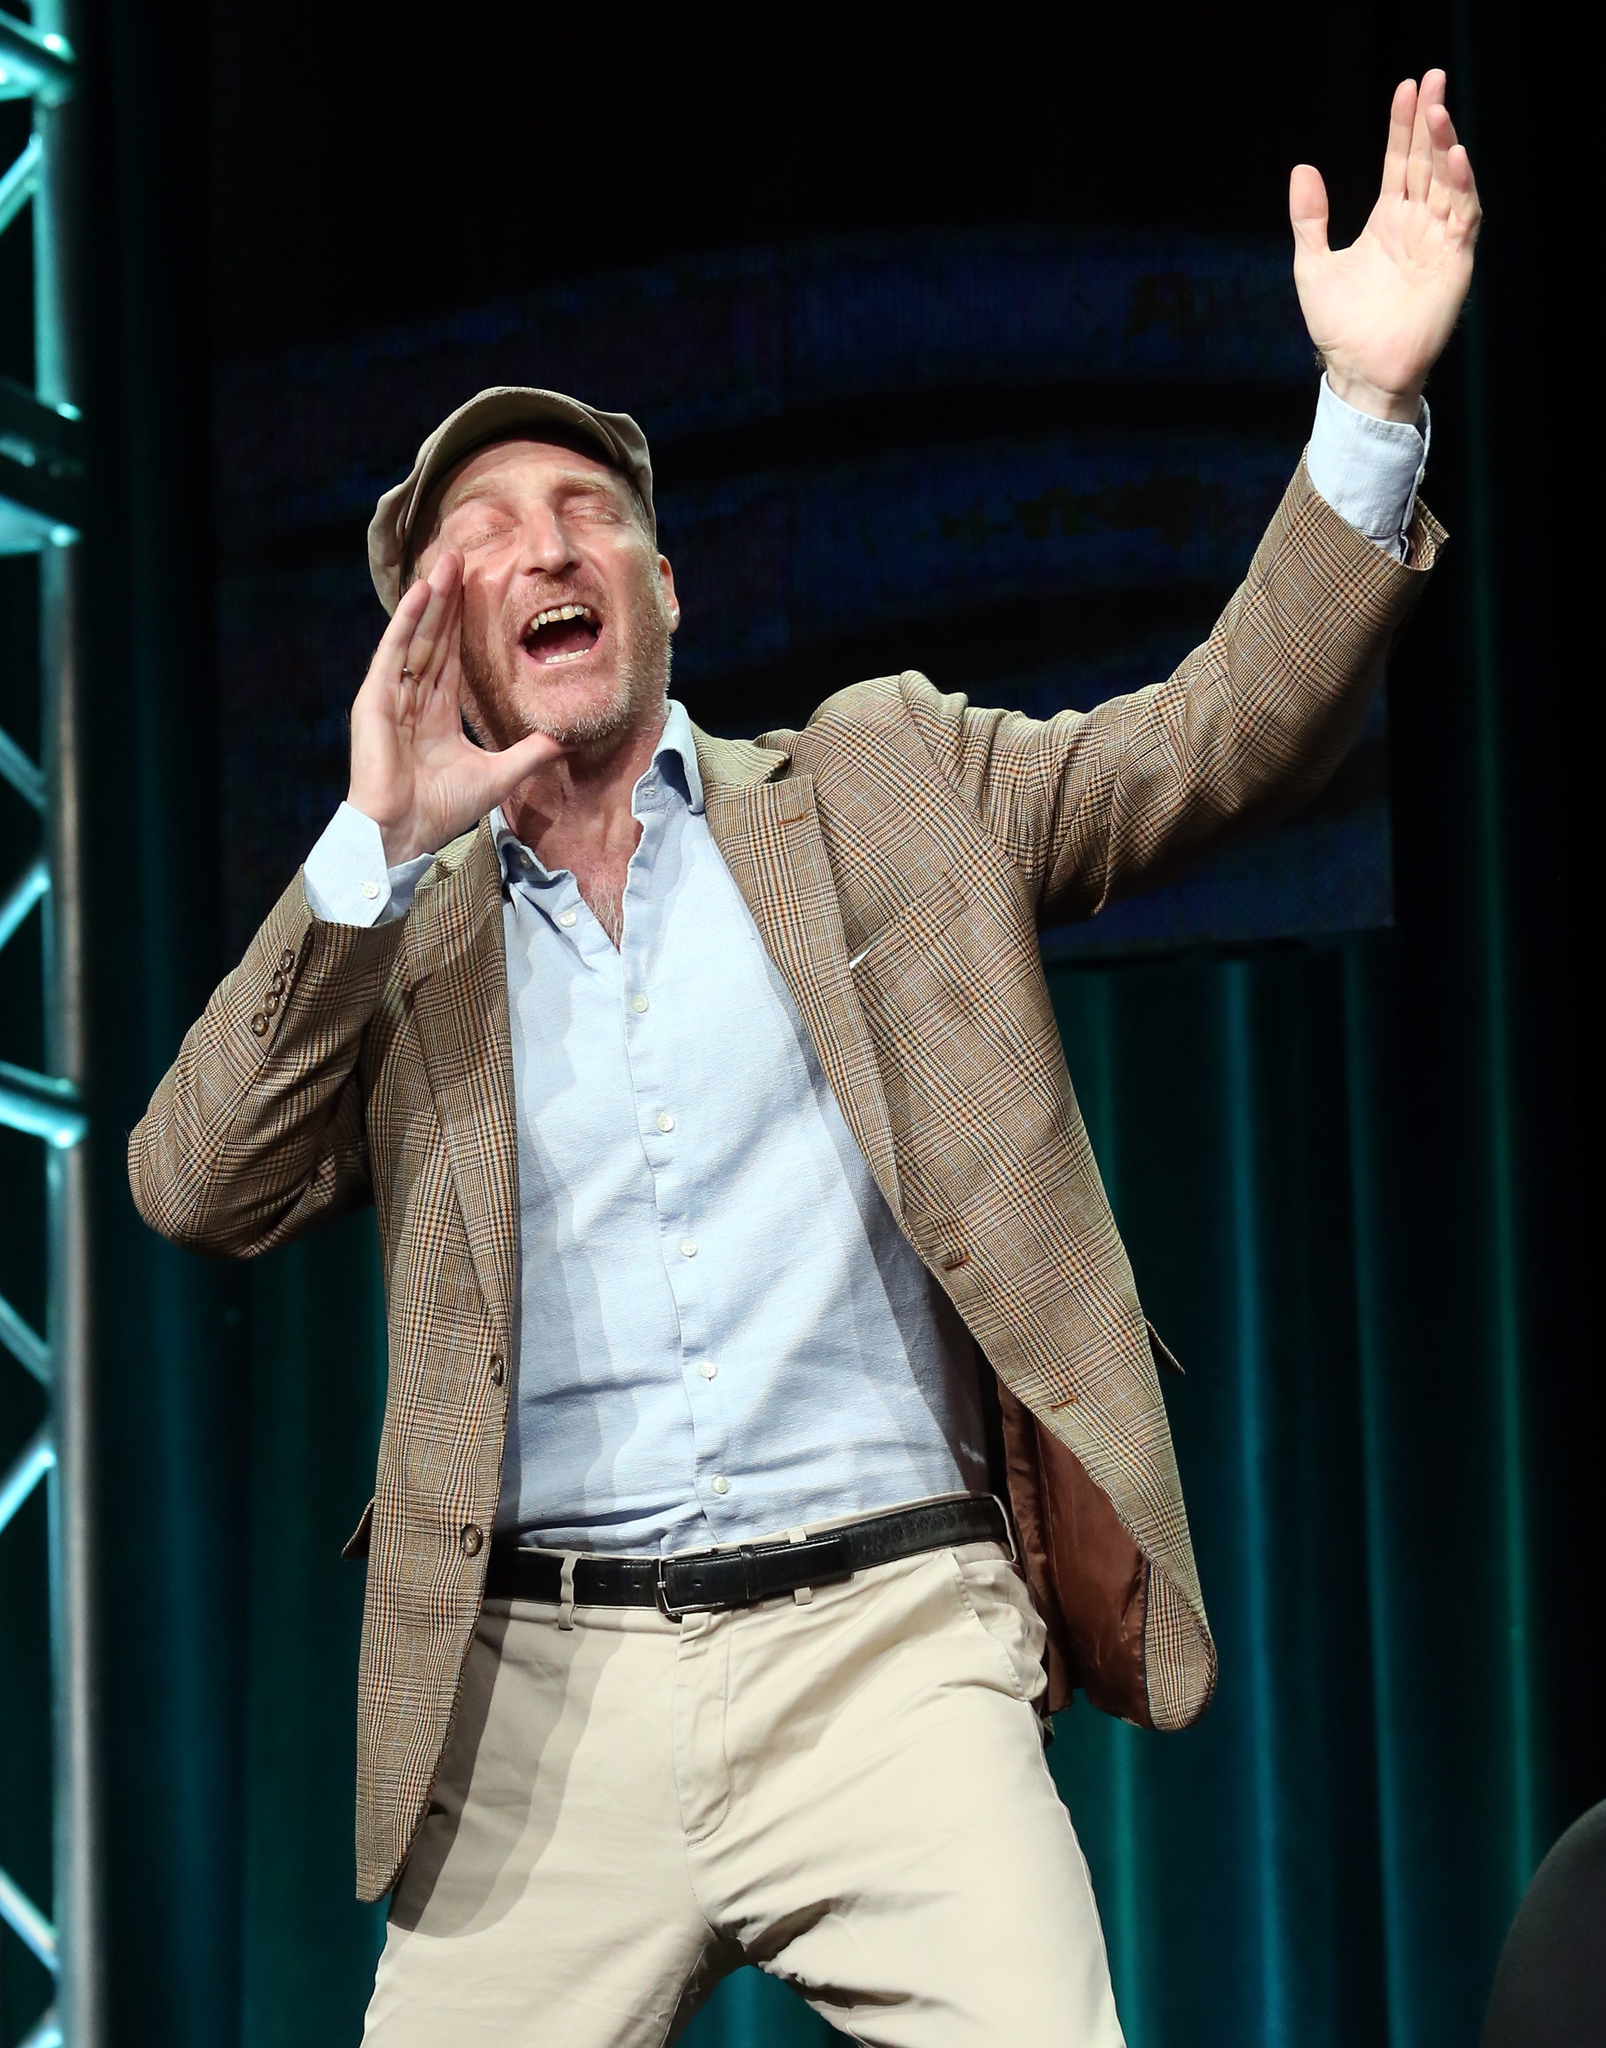 Jonathan Ames at event of Blunt Talk (2015)